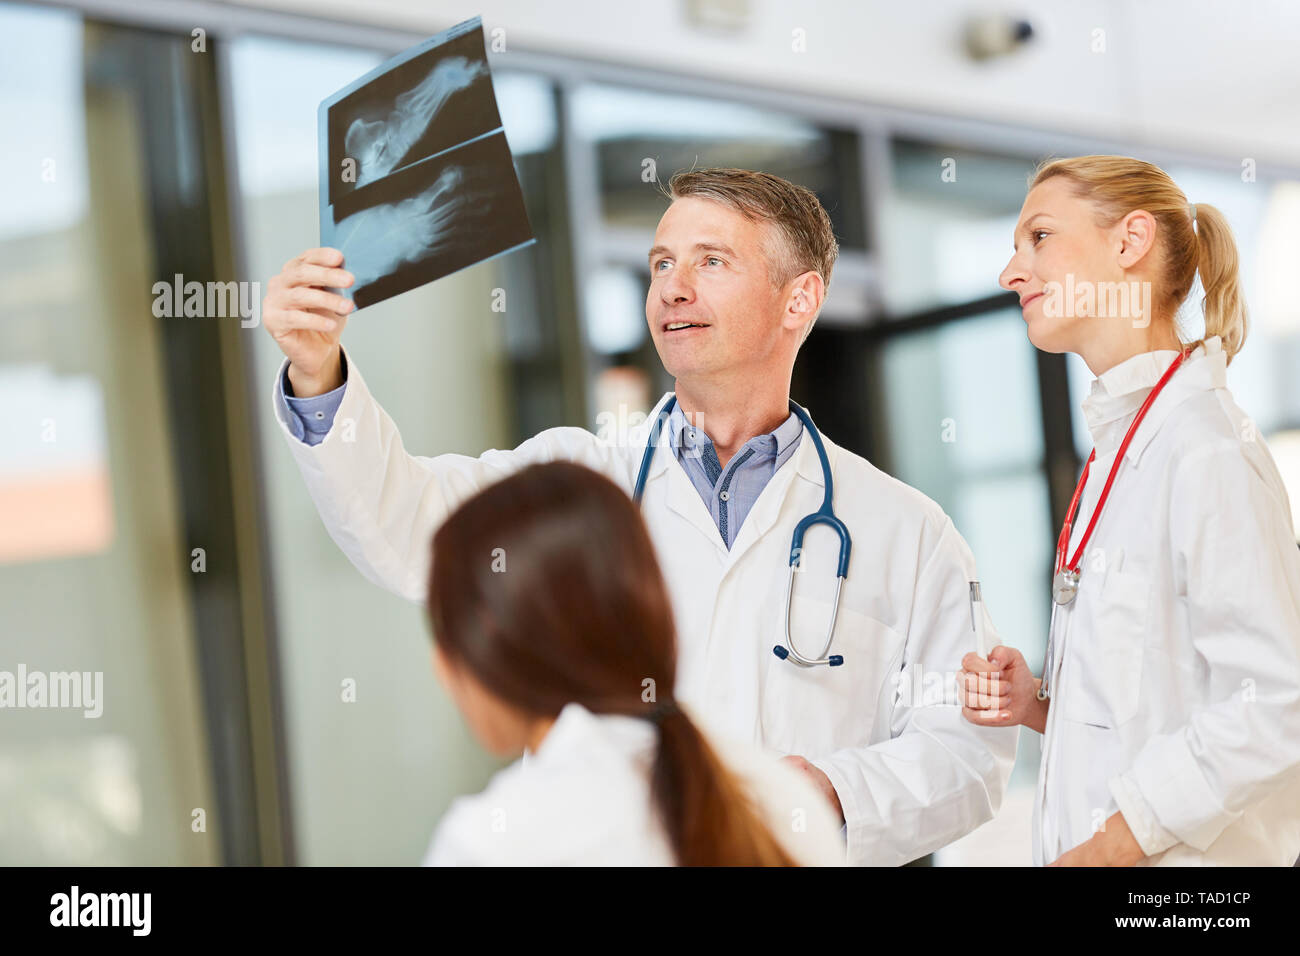 Senior physician and radiology team discuss an x-ray image in a workshop Stock Photo